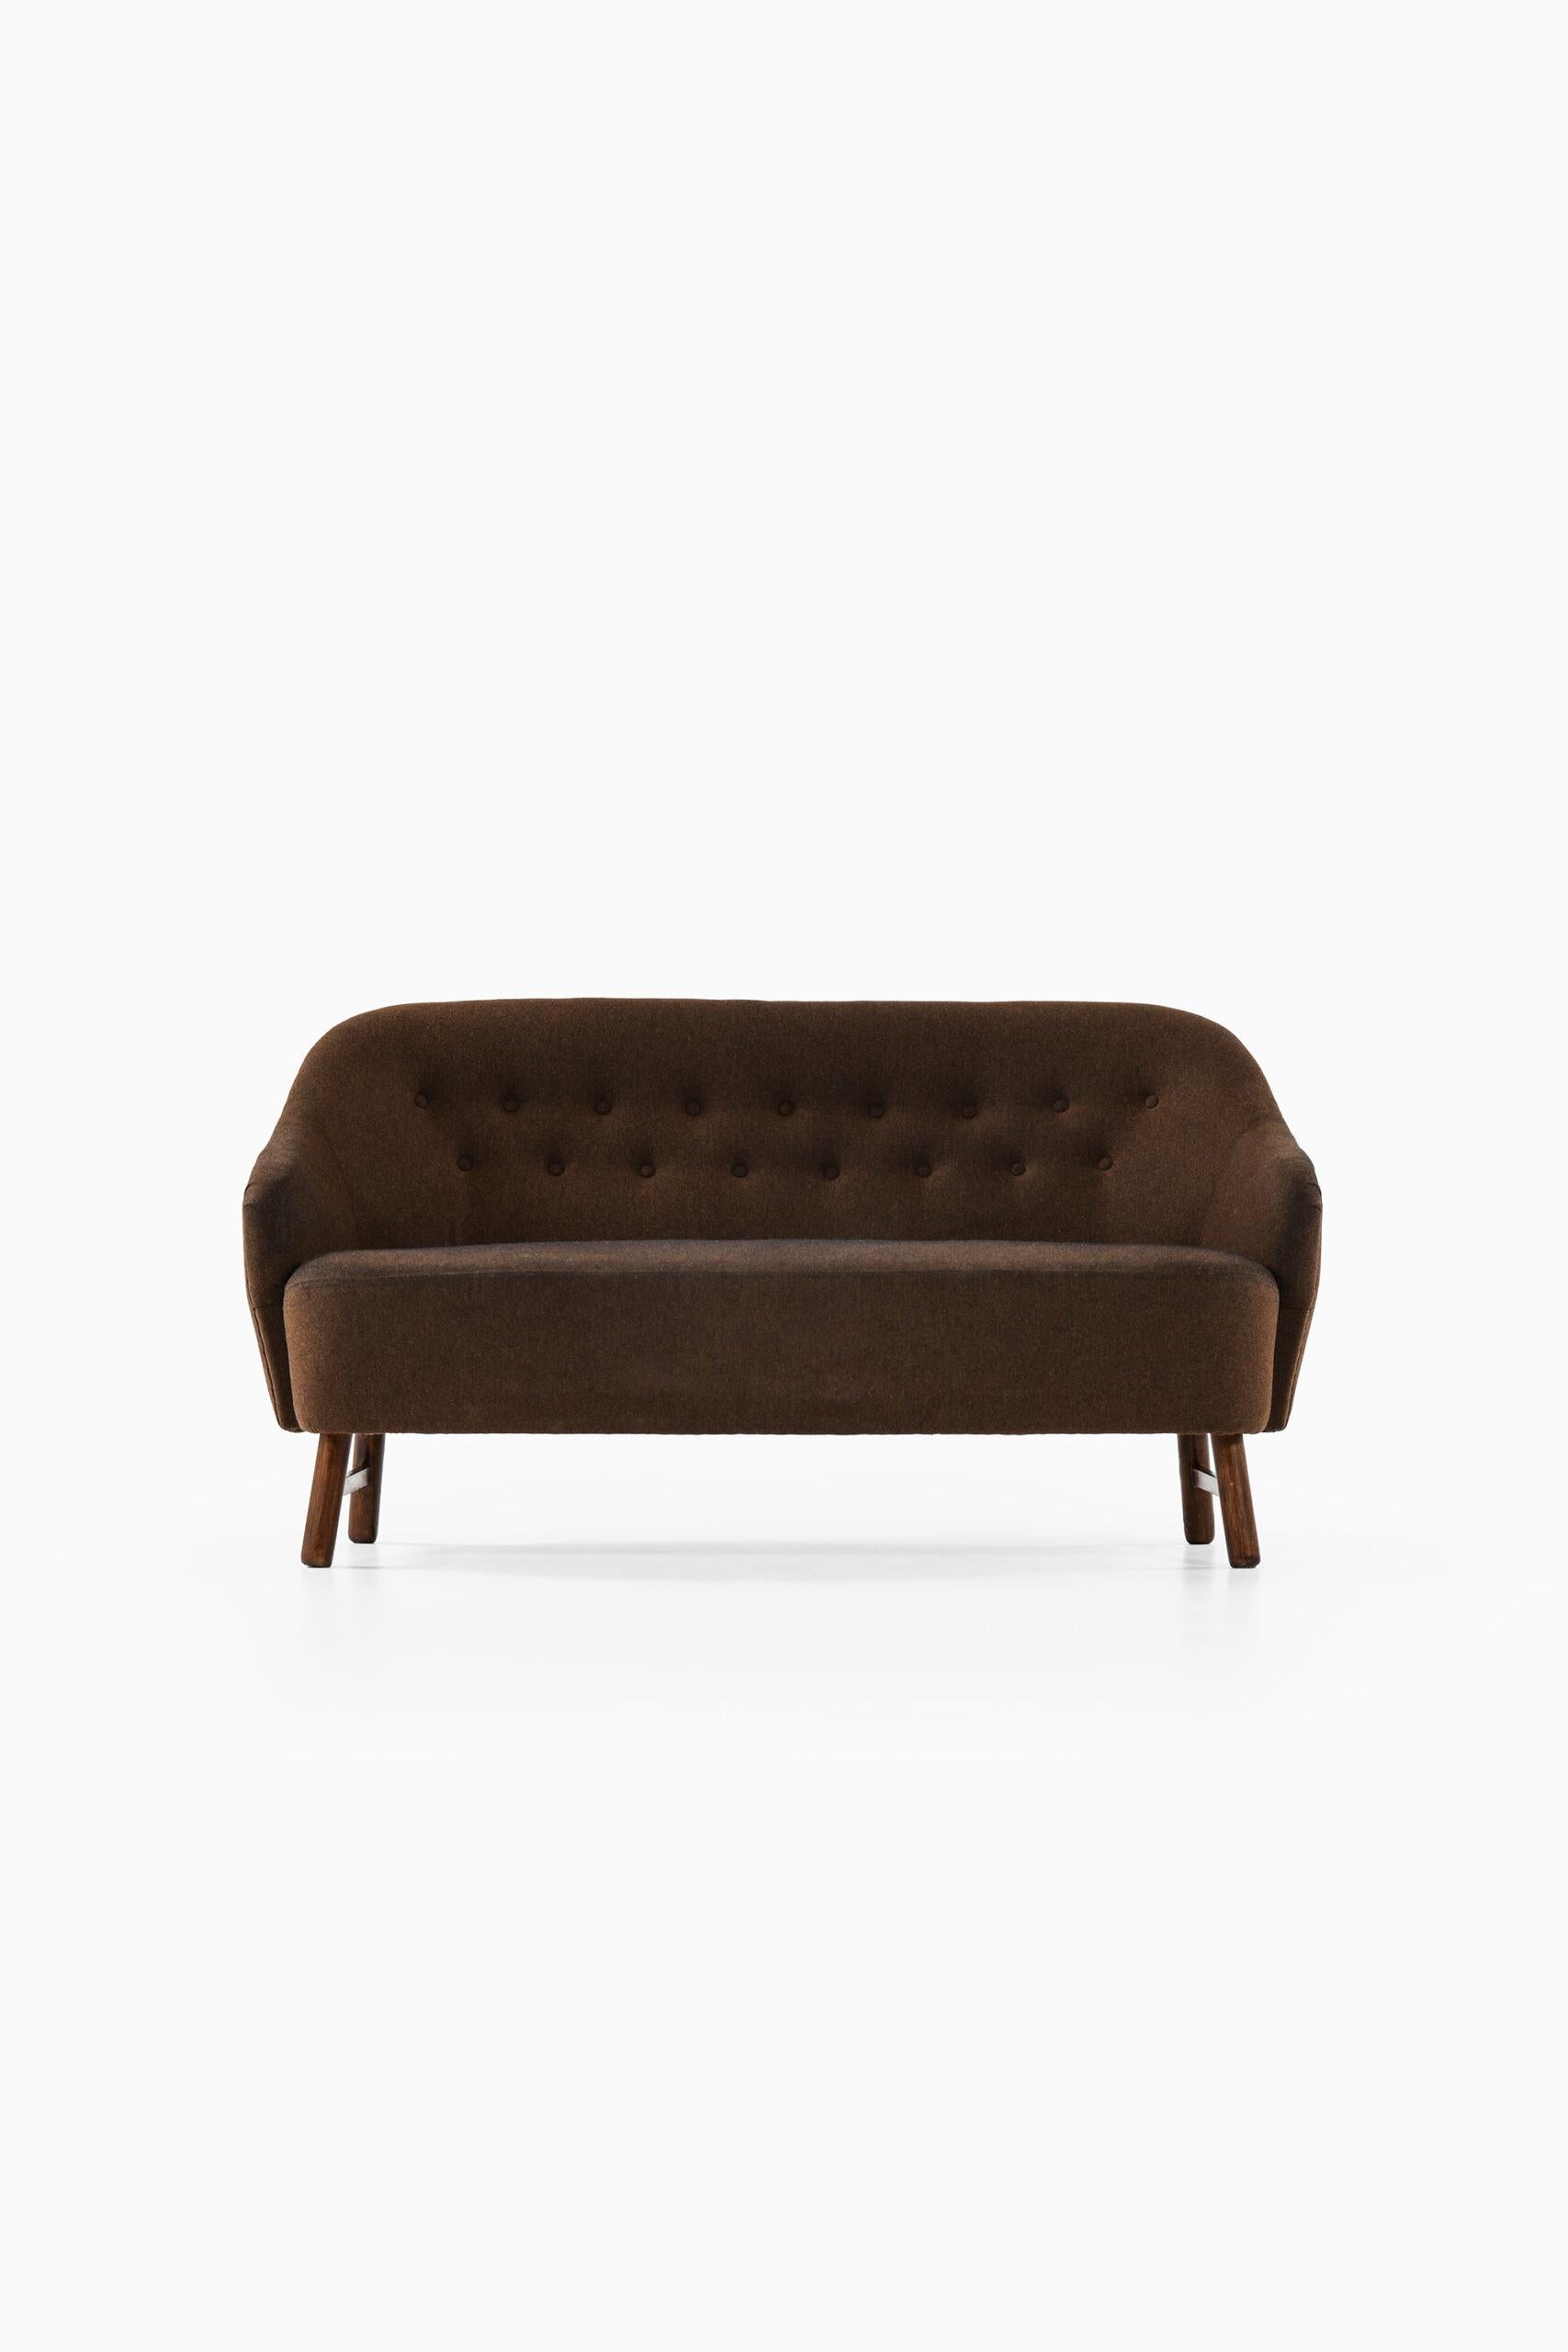 Sofa Attributed to Tove & Edvard Kindt-Larsen Produced in Denmark 2